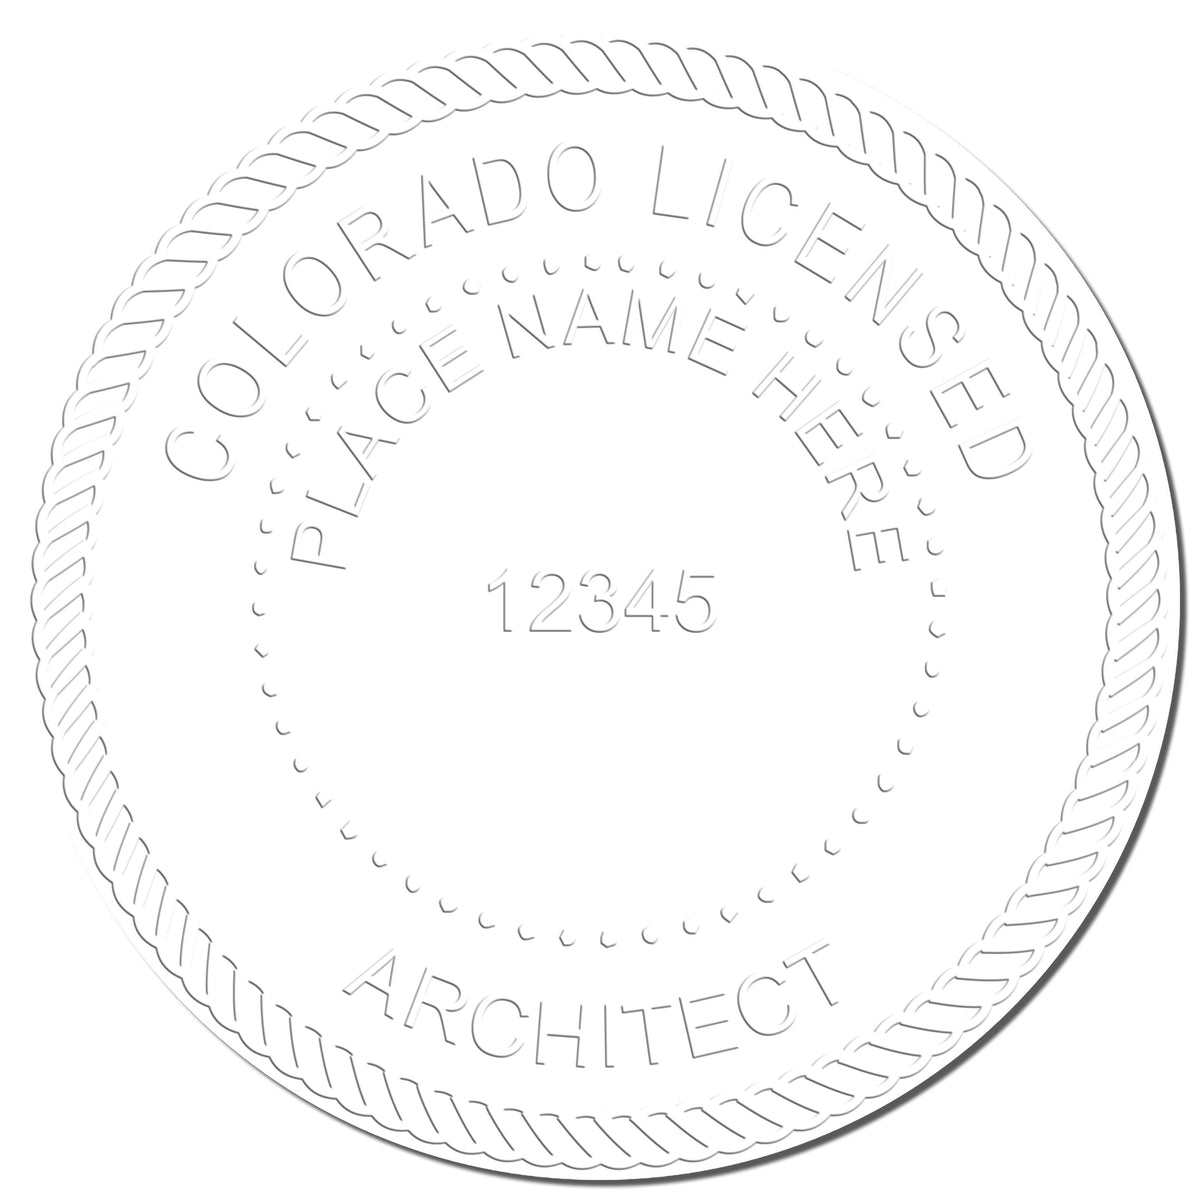 A photograph of the Extended Long Reach Colorado Architect Seal Embosser stamp impression reveals a vivid, professional image of the on paper.